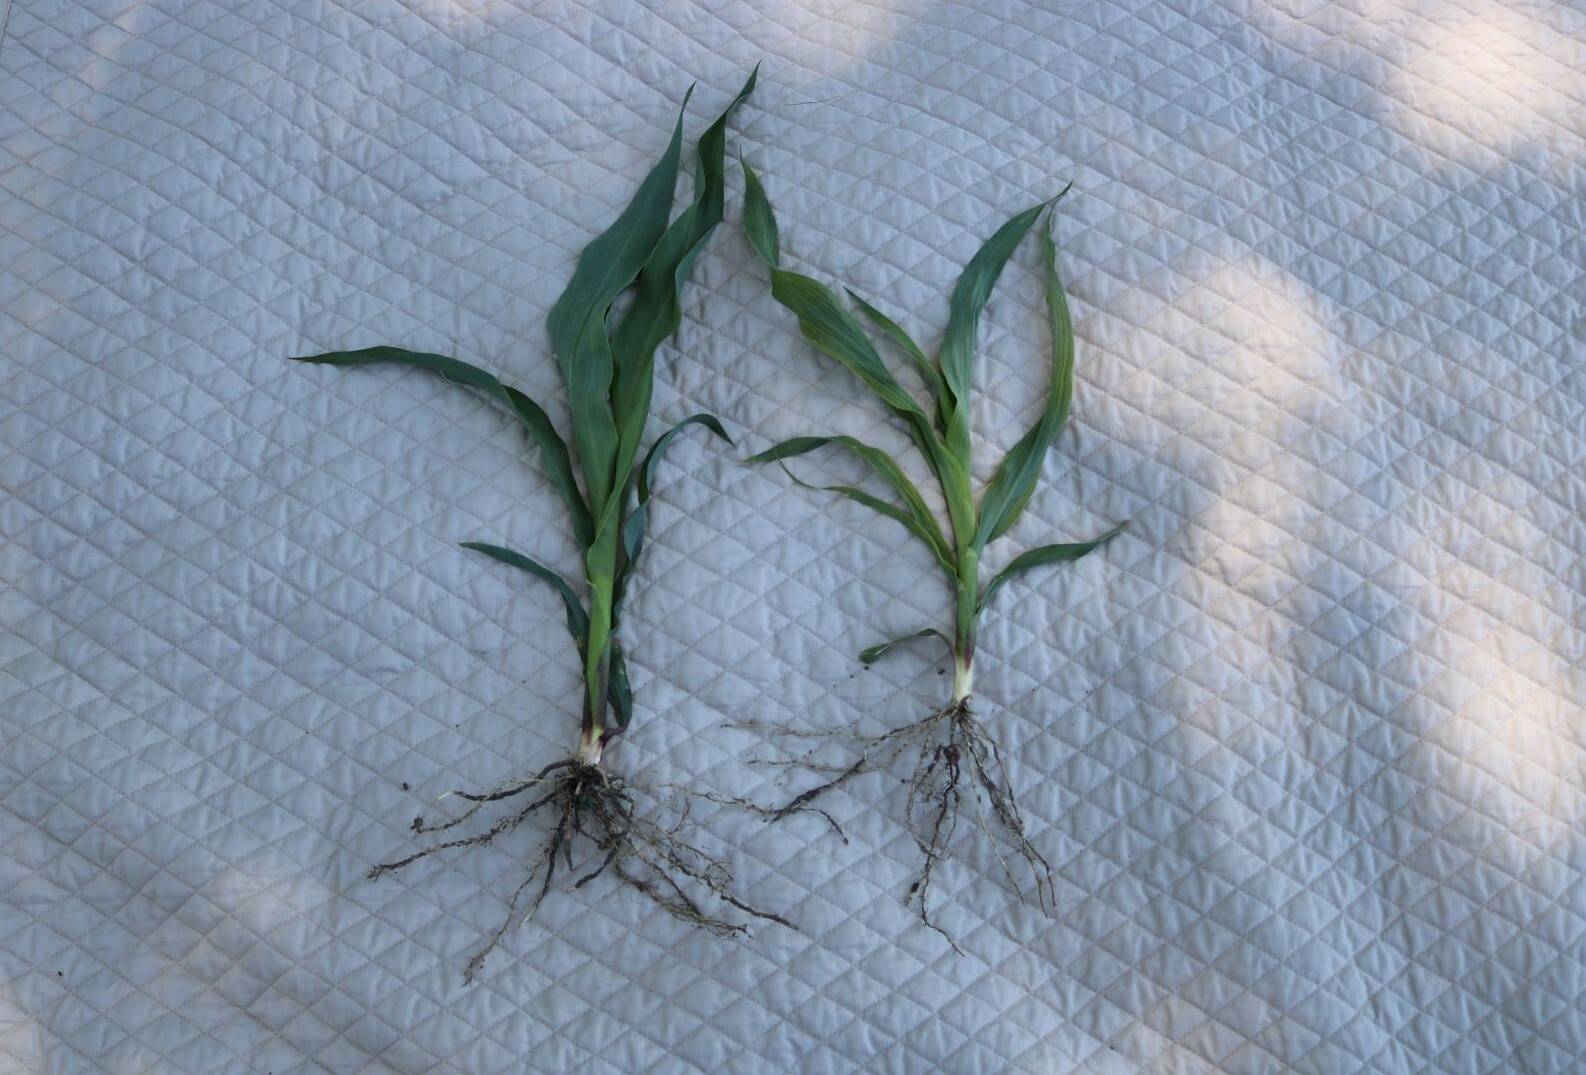 Corn plant fertilized with SO4 is bigger with thicker more substantial roots than the corn plant that did not receive sulfur.